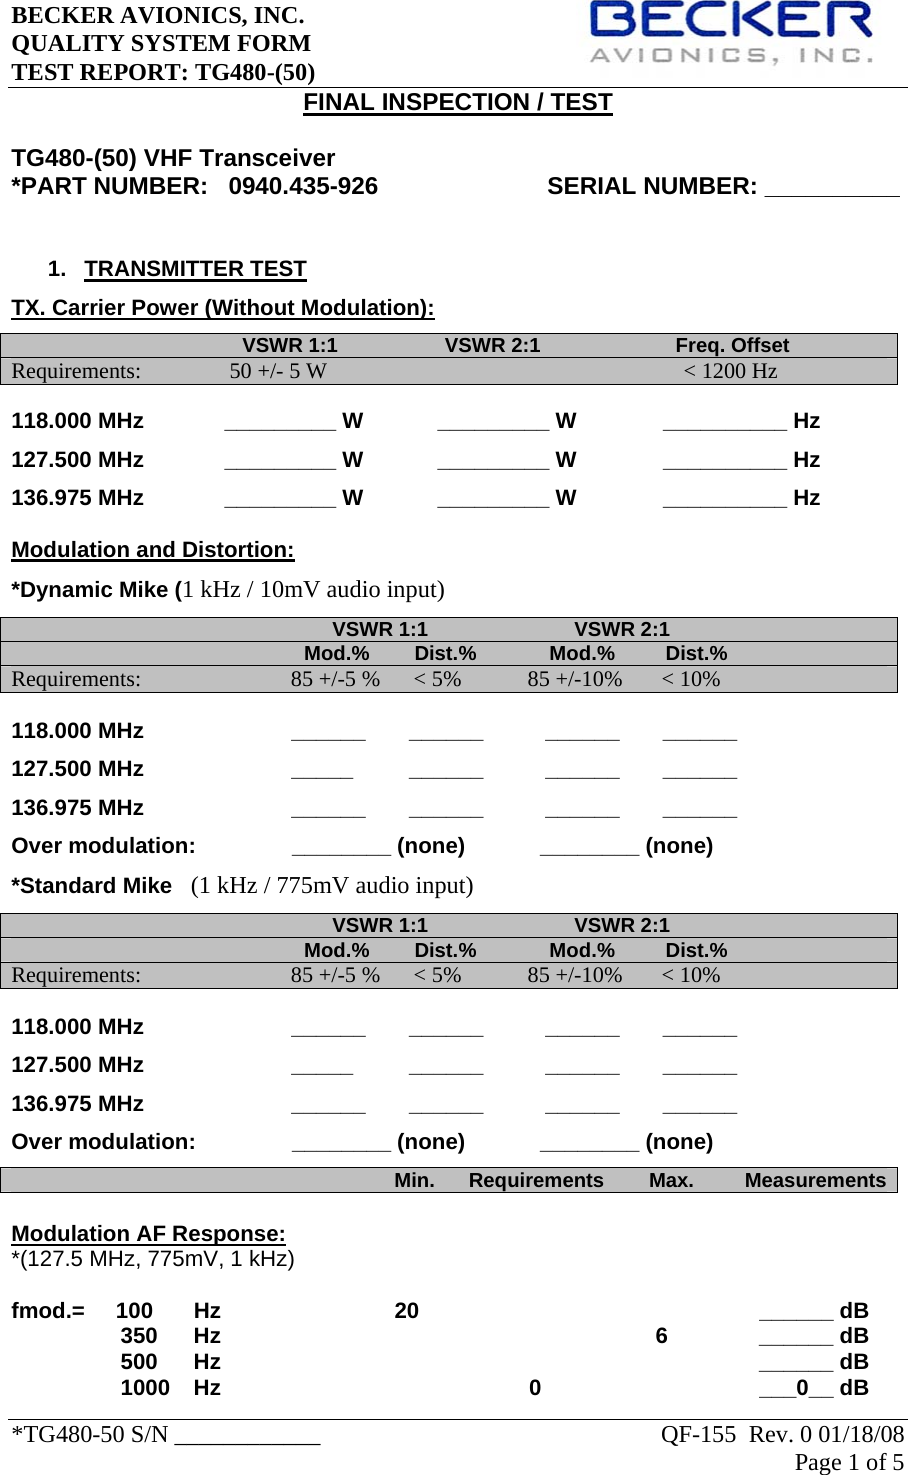 BECKER AVIONICS, INC.     QUALITY SYSTEM FORM TEST REPORT: TG480-(50)   *TG480-50 S/N ____________    QF-155  Rev. 0 01/18/08 Page 1 of 5   FINAL INSPECTION / TEST  TG480-(50) VHF Transceiver *PART NUMBER:   0940.435-926                         SERIAL NUMBER: __________                             1. TRANSMITTER TEST TX. Carrier Power (Without Modulation):                                          VSWR 1:1                   VSWR 2:1                        Freq. Offset       Requirements:               50 +/- 5 W                                              &lt; 1200 Hz  118.000 MHz             _________ W            _________ W              __________ Hz   127.500 MHz             _________ W            _________ W              __________ Hz 136.975 MHz             _________ W            _________ W              __________ Hz  Modulation and Distortion:   *Dynamic Mike (1 kHz / 10mV audio input)                                                          VSWR 1:1                          VSWR 2:1                                                                                         Mod.%        Dist.%             Mod.%         Dist.%             Requirements:                          85 +/-5 %      &lt; 5%     85 +/-10%       &lt; 10% 118.000 MHz                ______       ______          ______       ______  127.500 MHz        _____         ______          ______       ______    136.975 MHz        ______       ______          ______       ______  Over modulation:            ________ (none)     ________ (none)             *Standard Mike   (1 kHz / 775mV audio input)                                                          VSWR 1:1                          VSWR 2:1                                                                                         Mod.%        Dist.%             Mod.%         Dist.%             Requirements:                          85 +/-5 %      &lt; 5%     85 +/-10%       &lt; 10% 118.000 MHz                ______       ______          ______       ______  127.500 MHz        _____         ______          ______       ______  136.975 MHz        ______       ______          ______       ______  Over modulation:            ________ (none)     ________ (none)                                                                                 Min.      Requirements        Max.         Measurements Modulation AF Response: *(127.5 MHz, 775mV, 1 kHz)  fmod.=     100    Hz     20         ______ dB 350     Hz     6     ______ dB 500    Hz         ______ dB 1000   Hz              0       ___0__ dB 